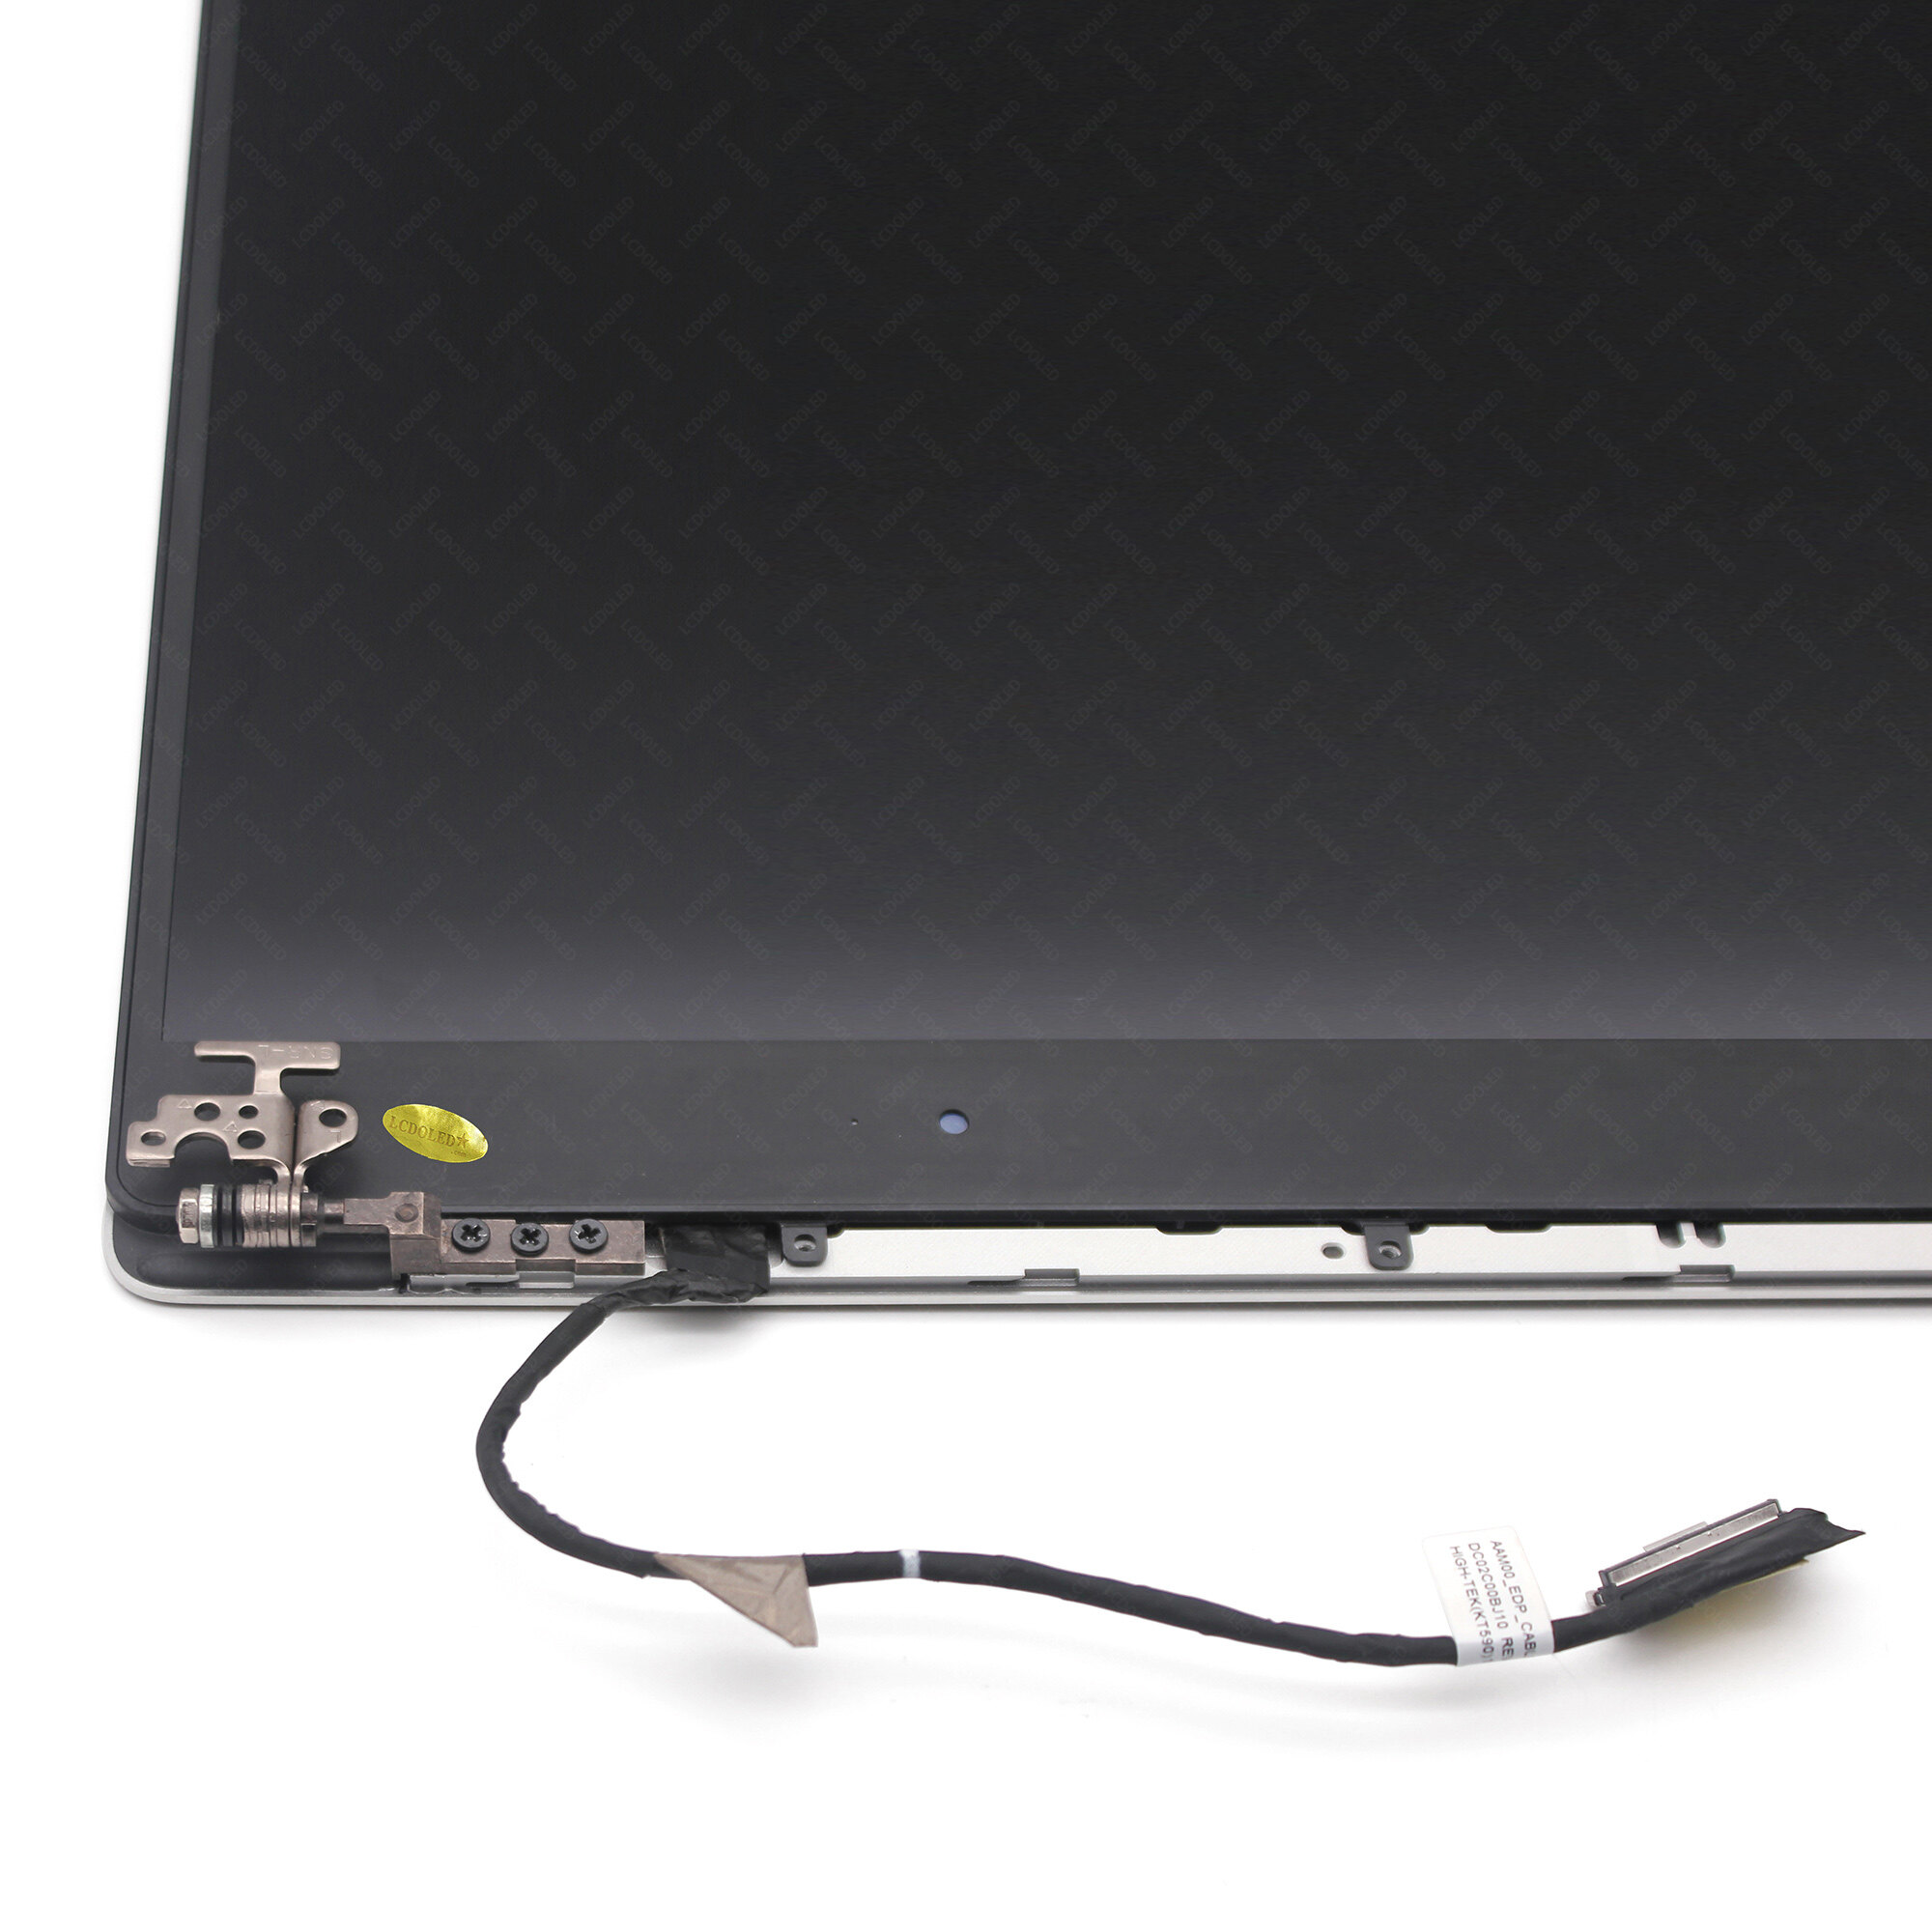 LCD Screen Display LED Monitor Complete Assembly For Dell XPS 15 9560 PRXRV K9Y63 GDRXG 00XNR YT6Y2